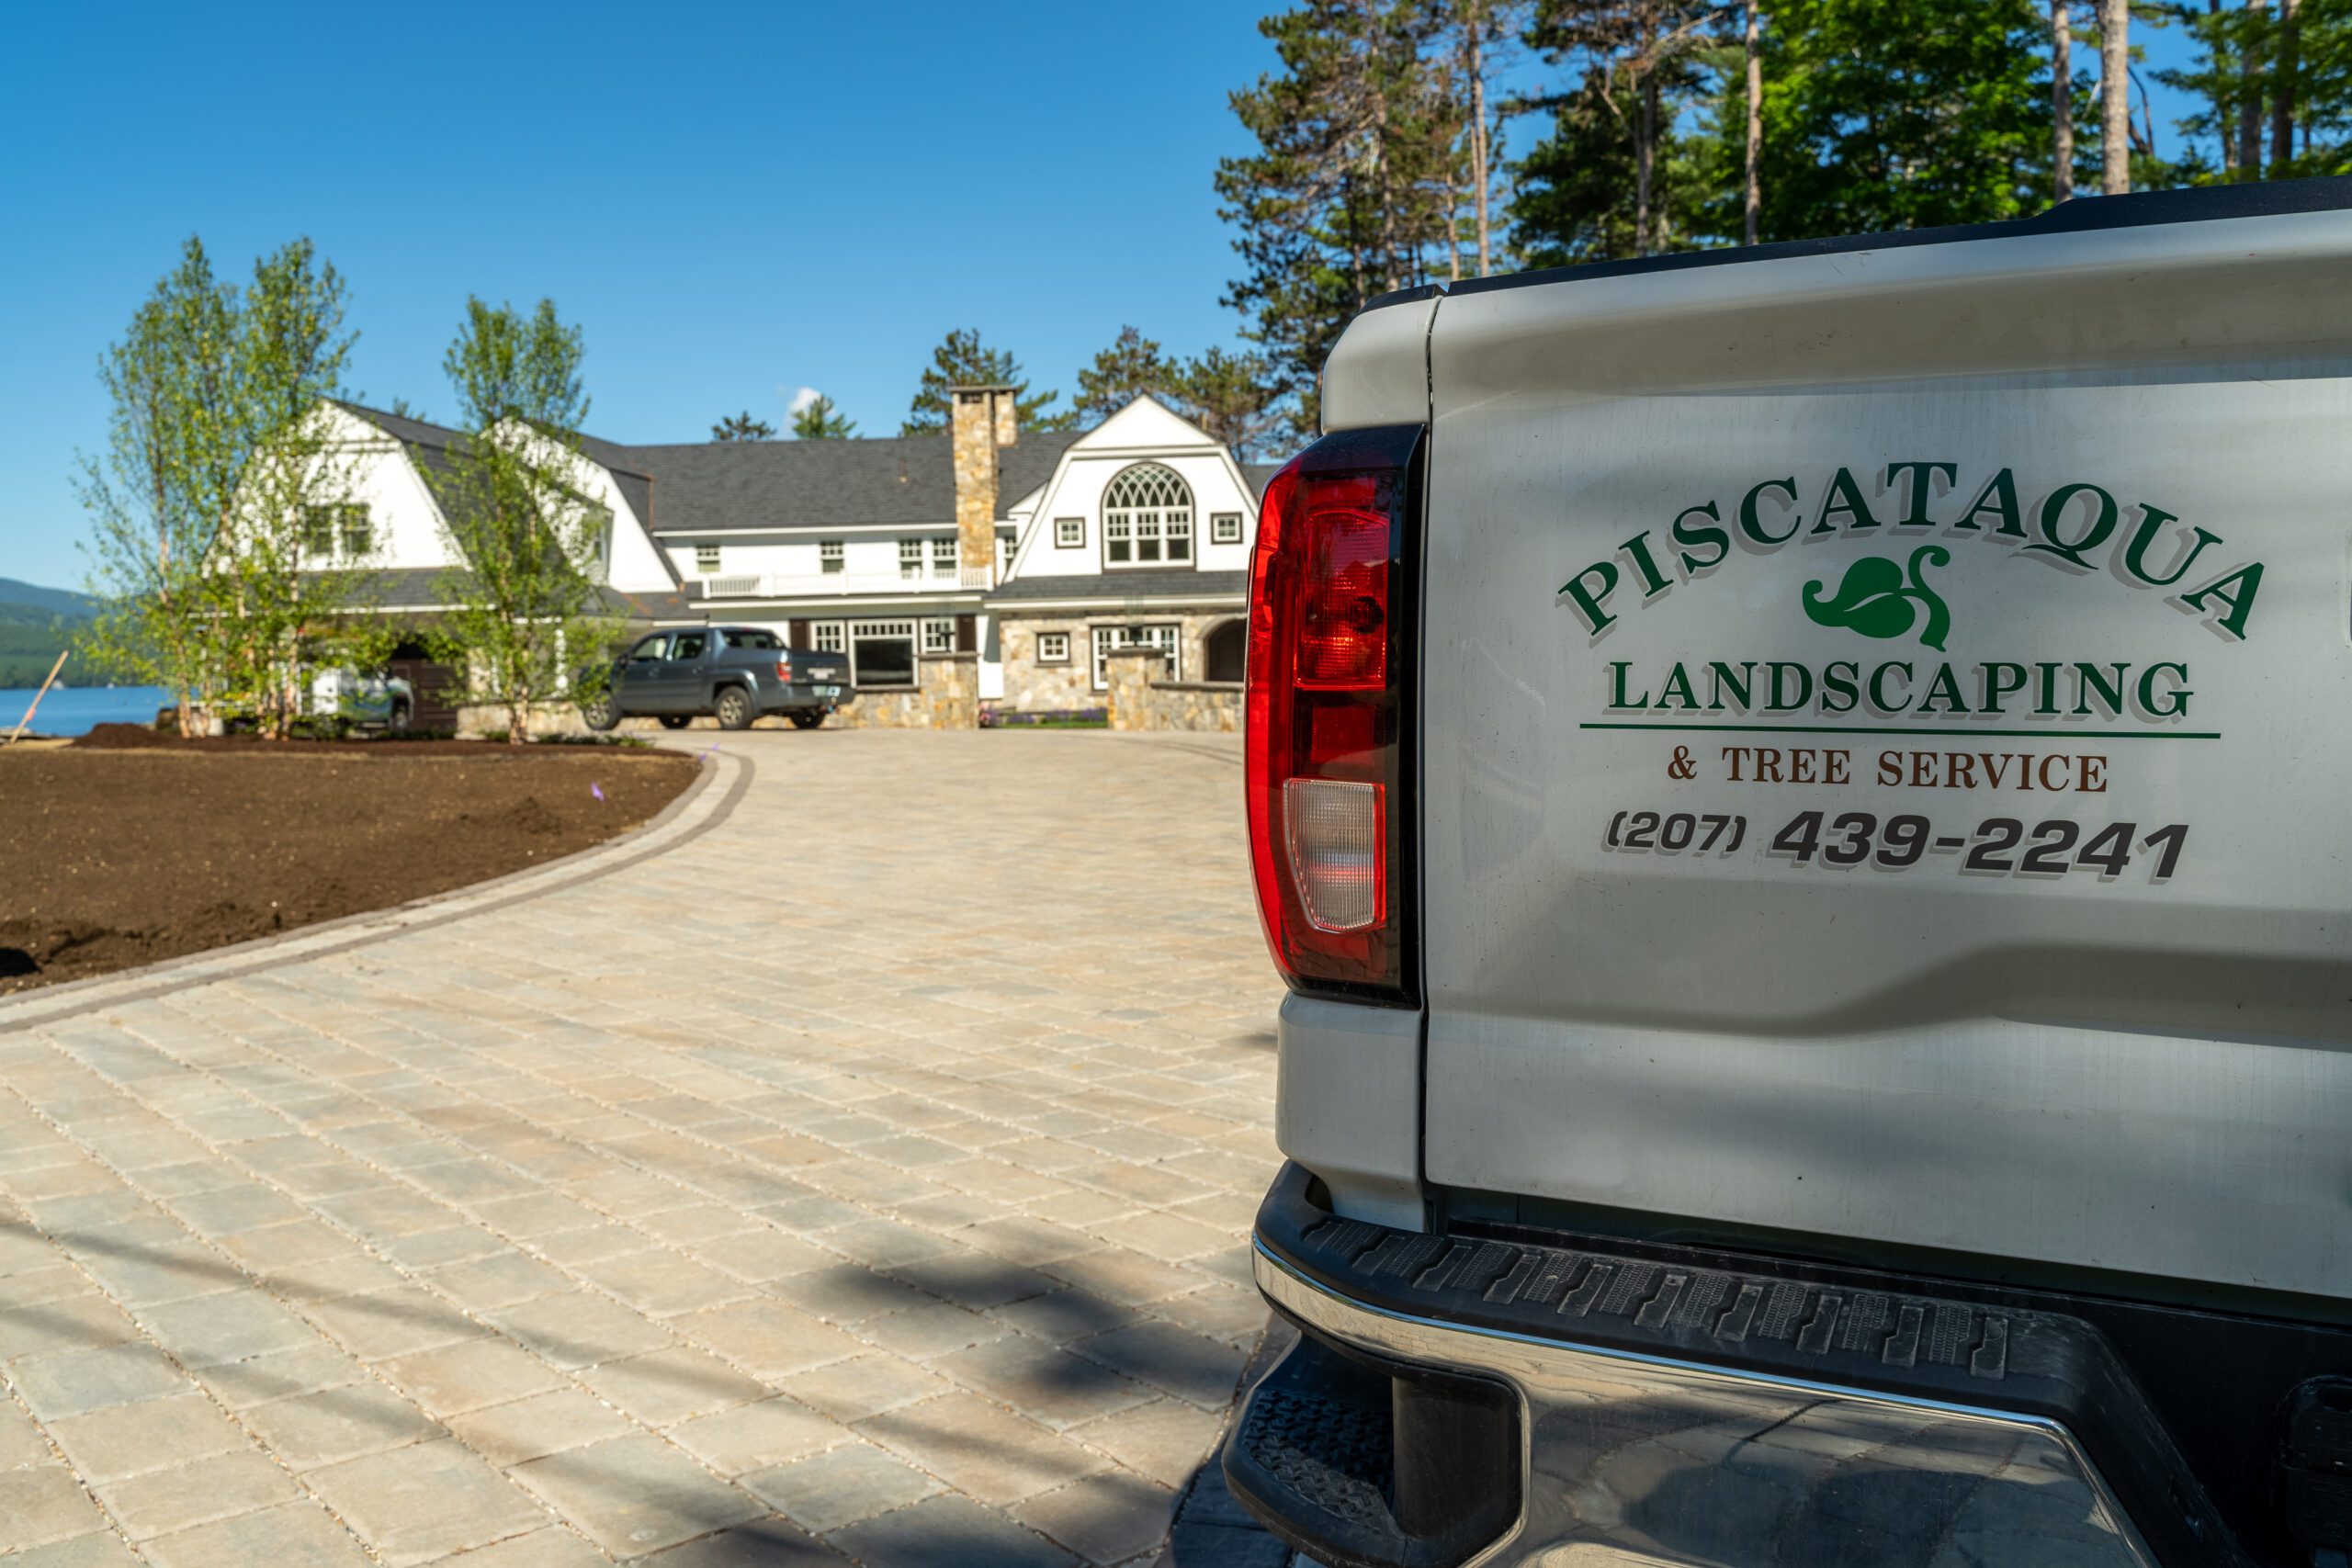 A beautiful house on the Seacoast with a Piscataqua Landscaping Truck in the forefront.